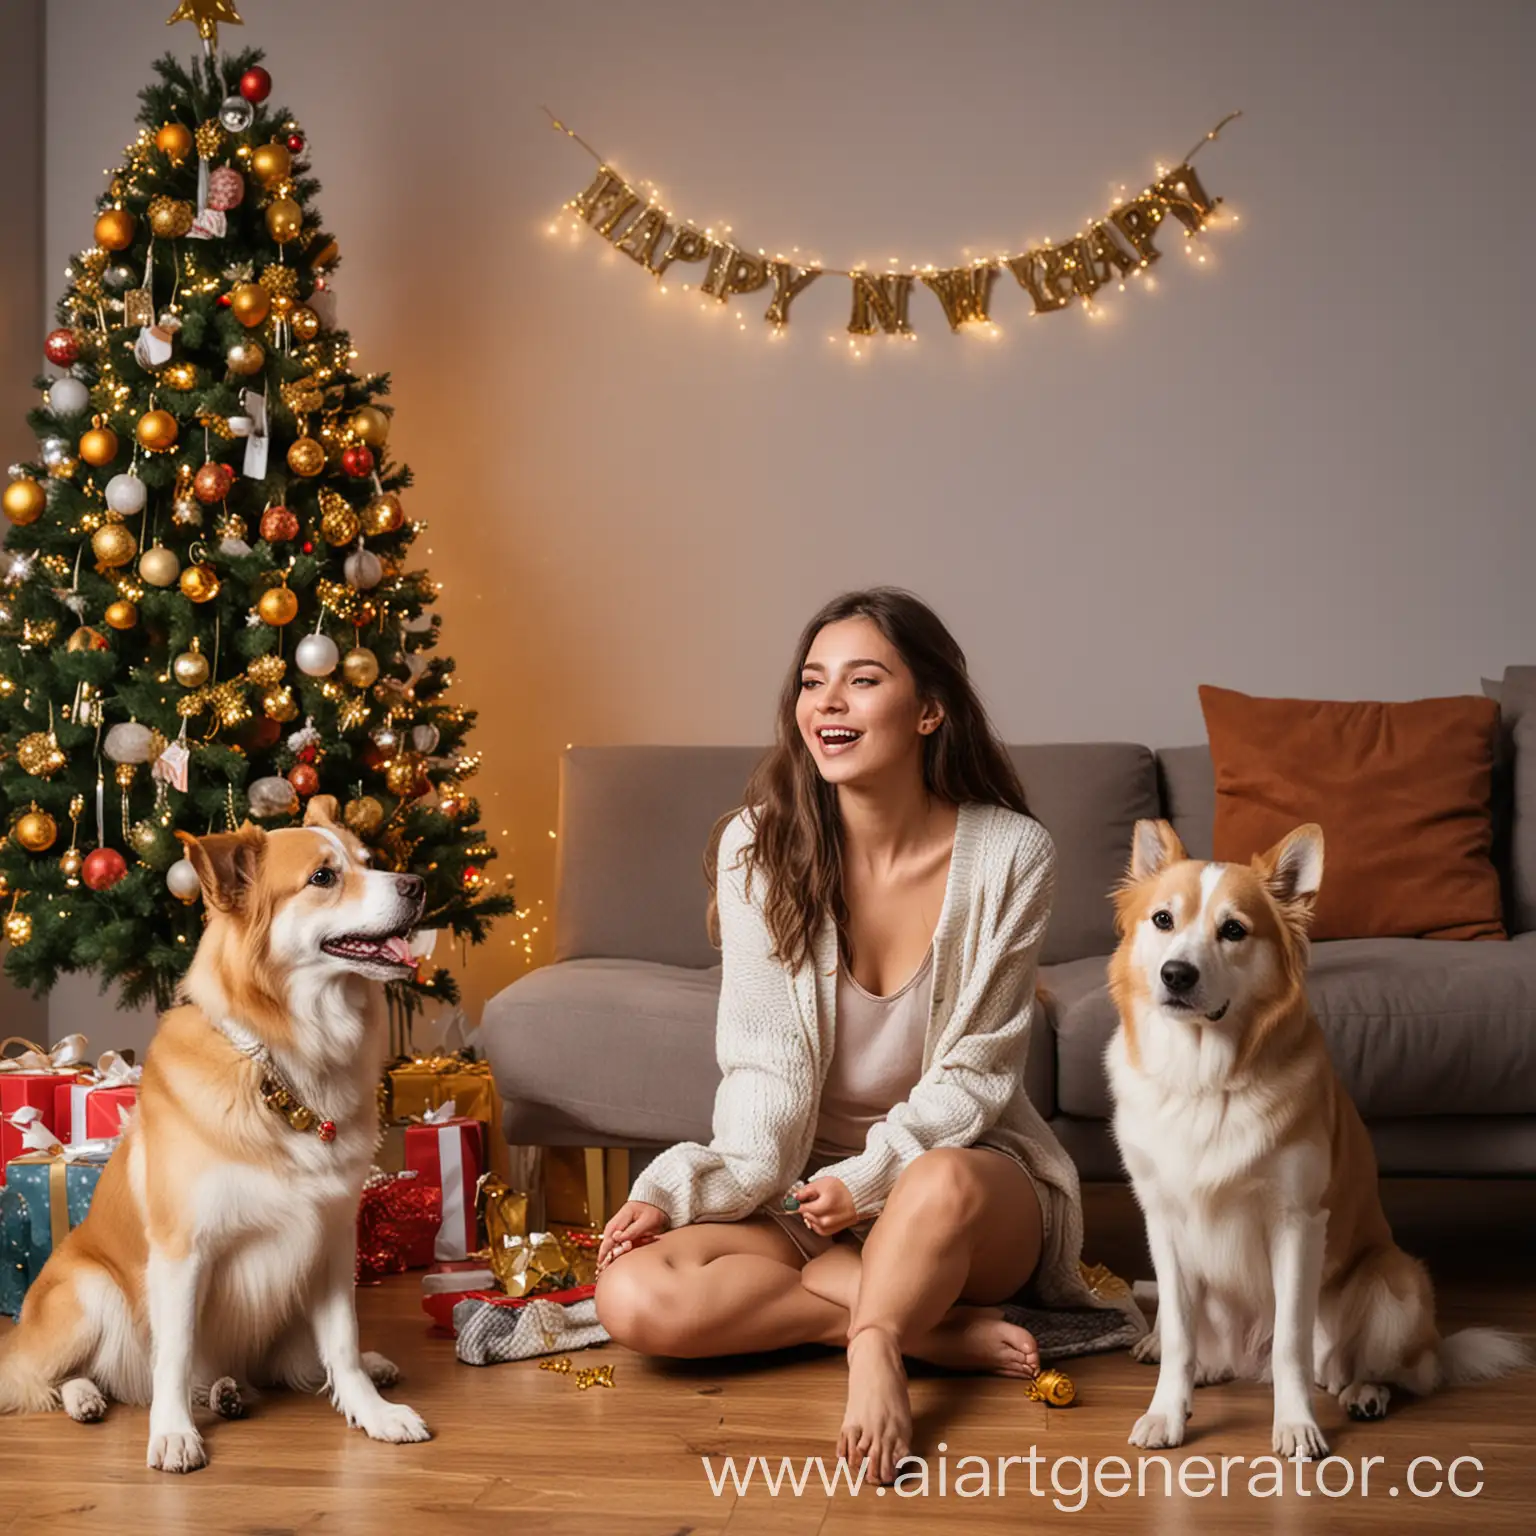 Girl-Celebrating-New-Year-Alone-with-Her-Dogs-Joyful-Holiday-Moment-with-Canine-Companions